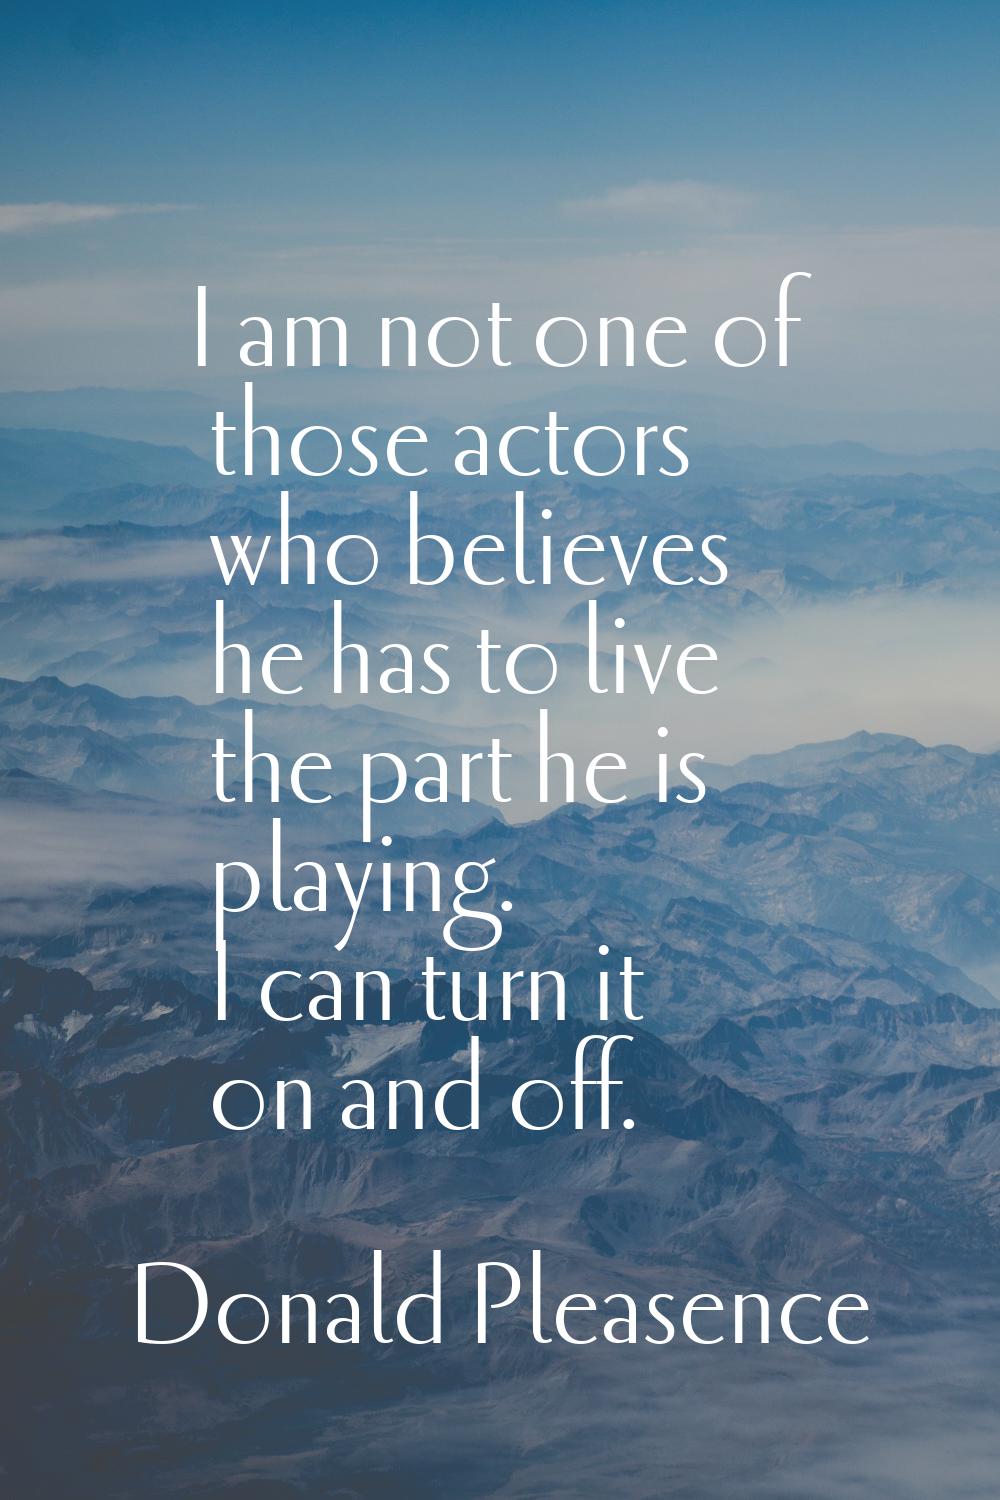 I am not one of those actors who believes he has to live the part he is playing. I can turn it on a